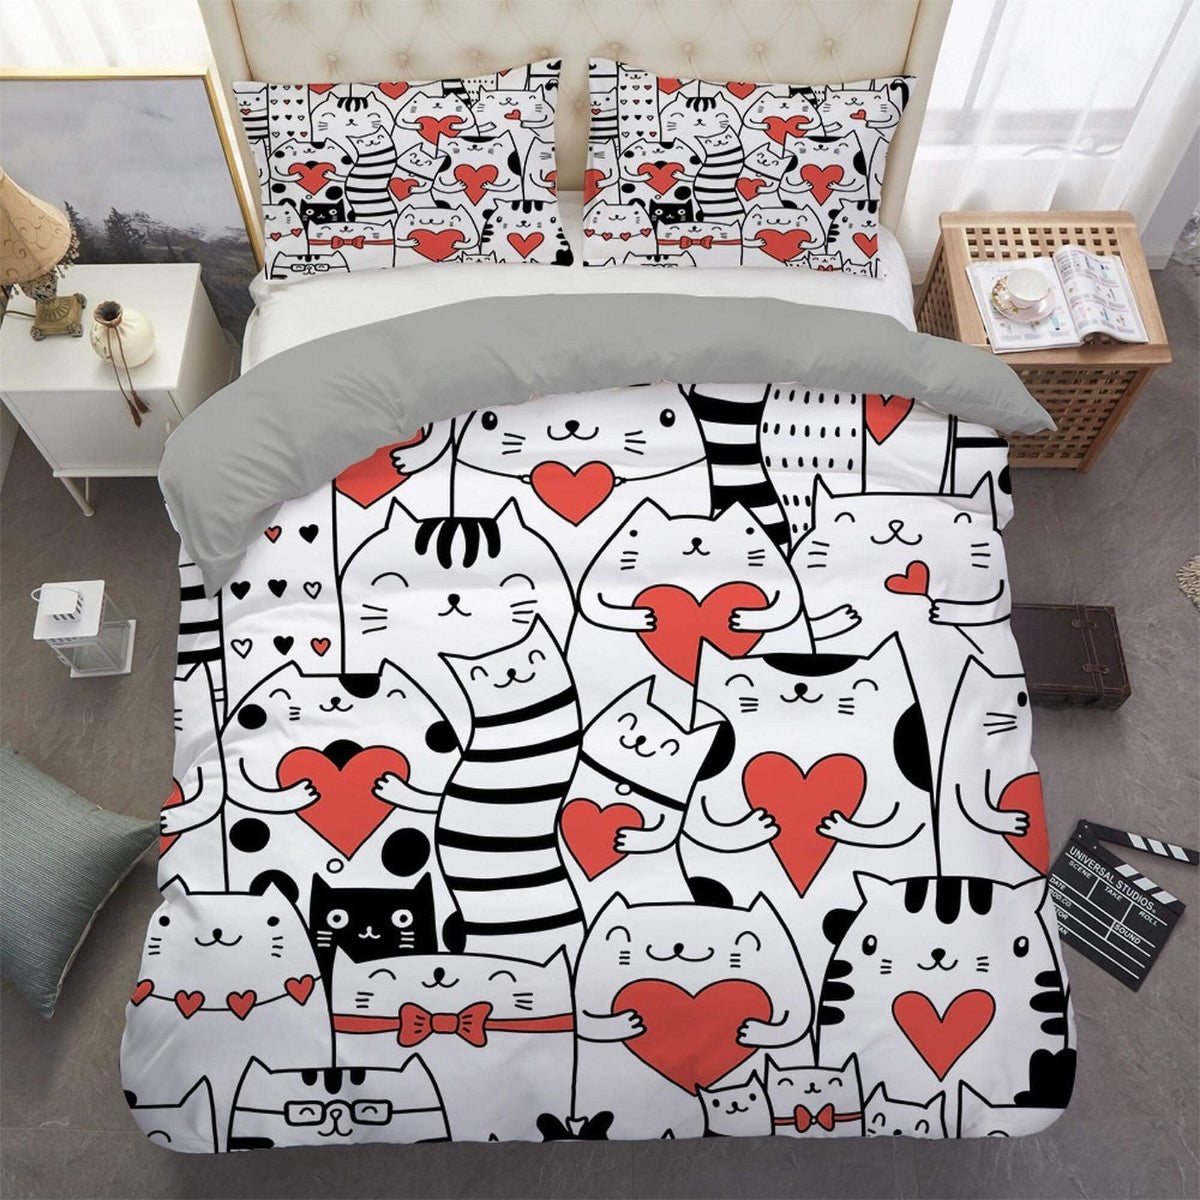 daintyduvet Black and white bedding cats with hearts, unisex toddler bedding, kids duvet cover set, gift for cat lovers, baby bedding, baby shower gift